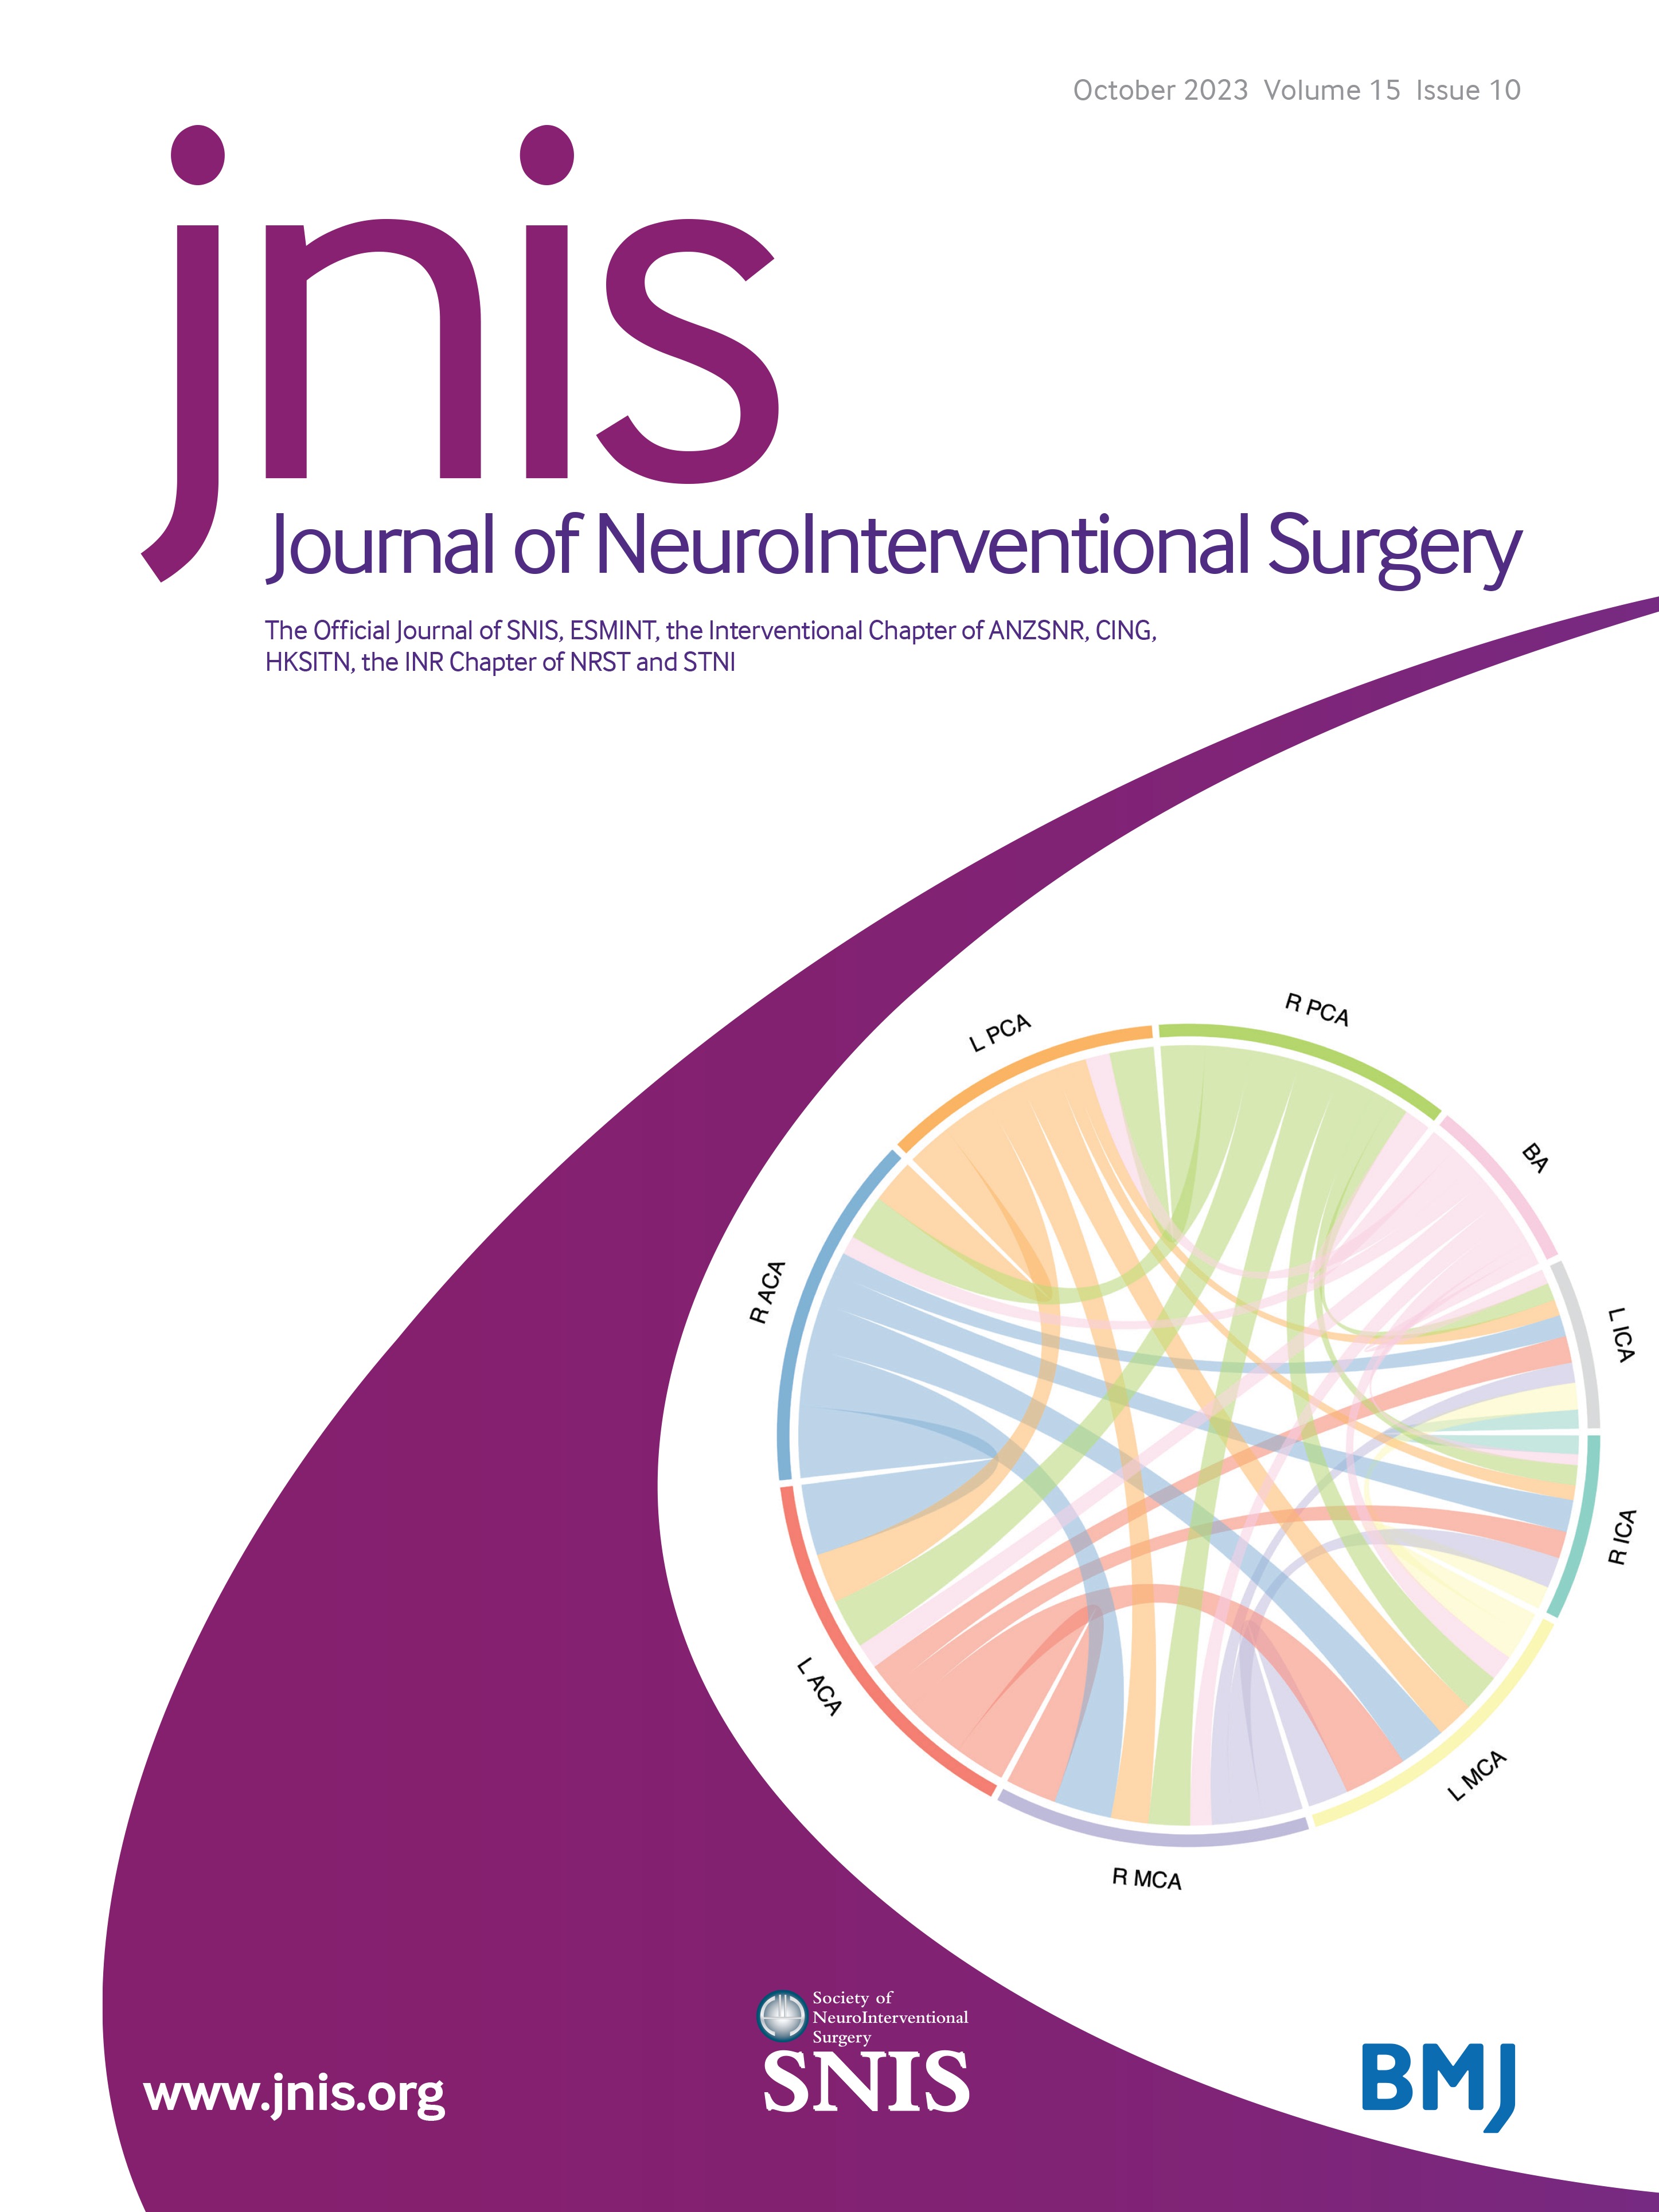 Reocclusion after successful endovascular treatment in acute ischemic stroke: systematic review and meta-analysis